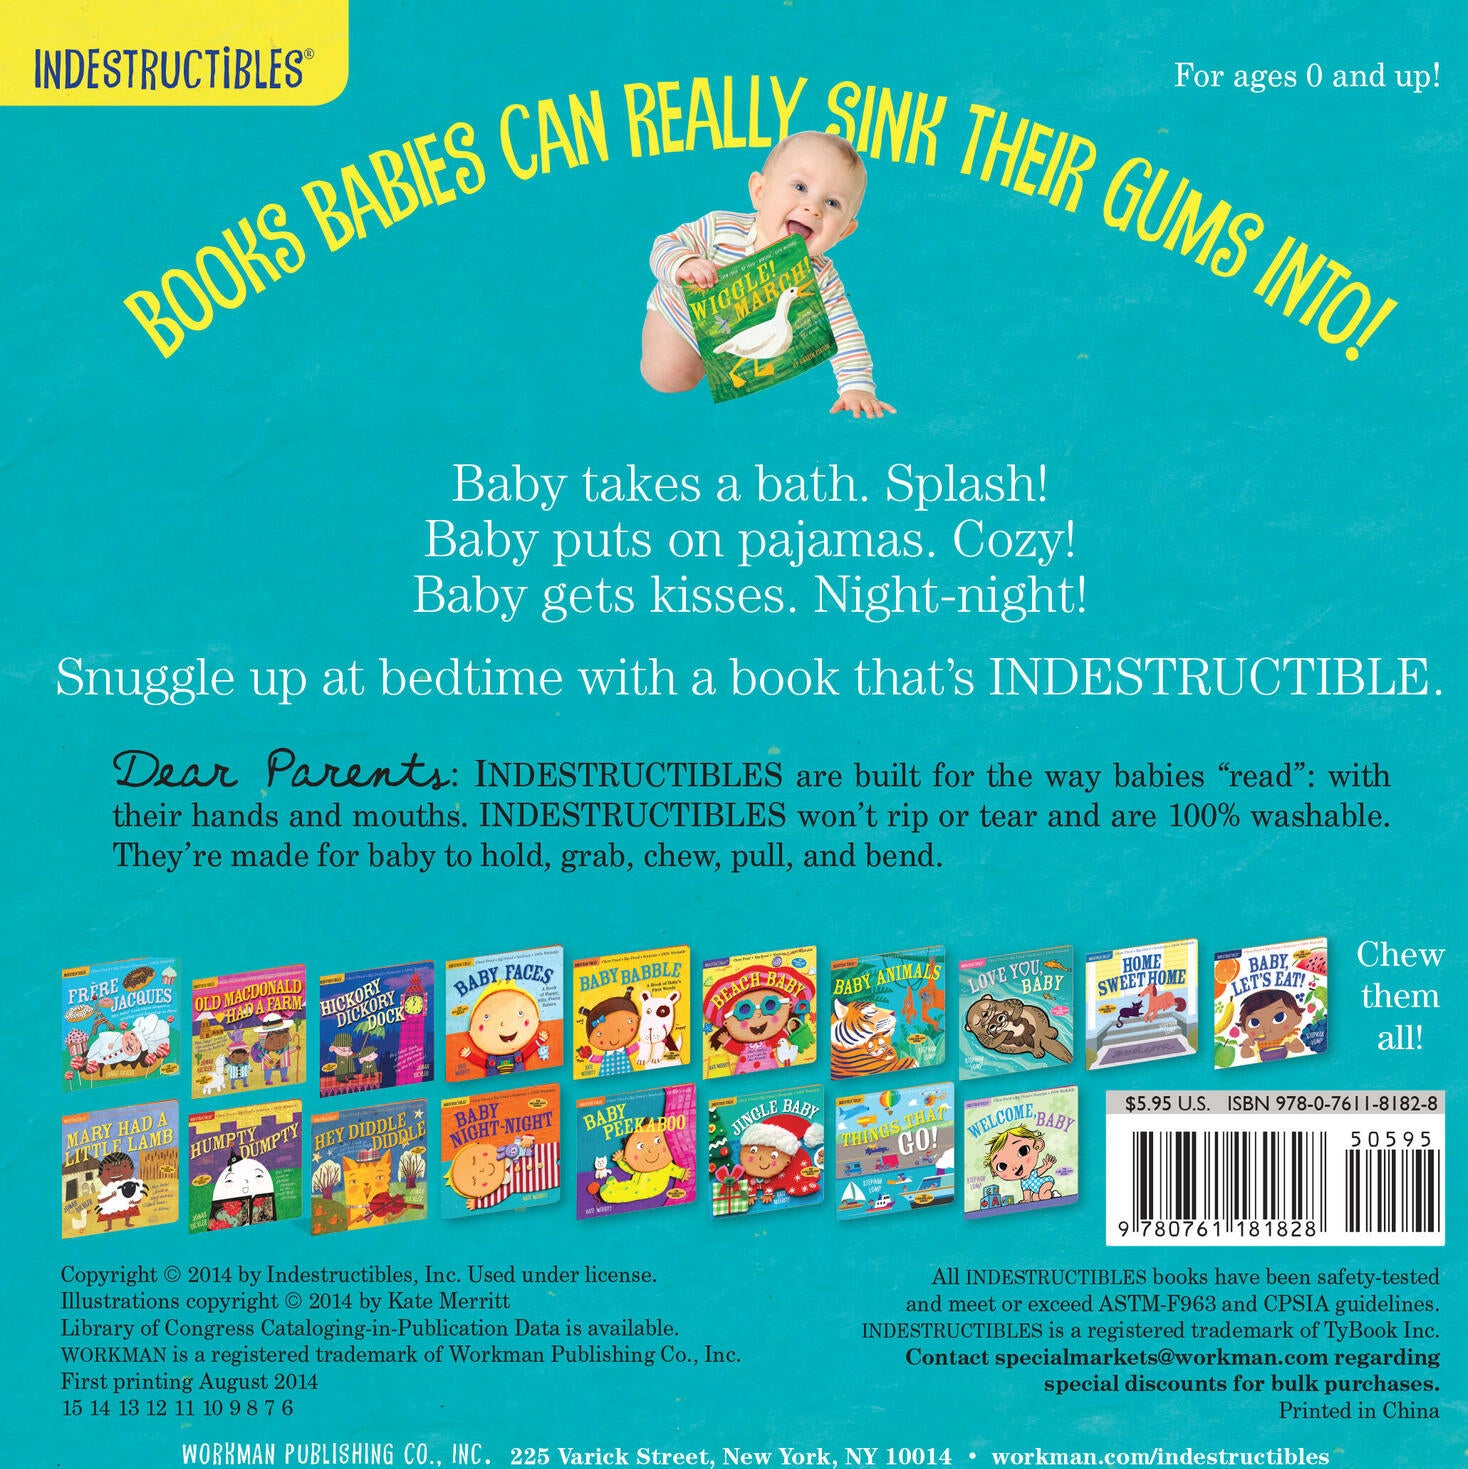 Indestructibles: Baby Night-Night: Chew Proof · Rip Proof · Nontoxic · 100% Washable (Book for Babies, Newborn Books, Safe to Chew)